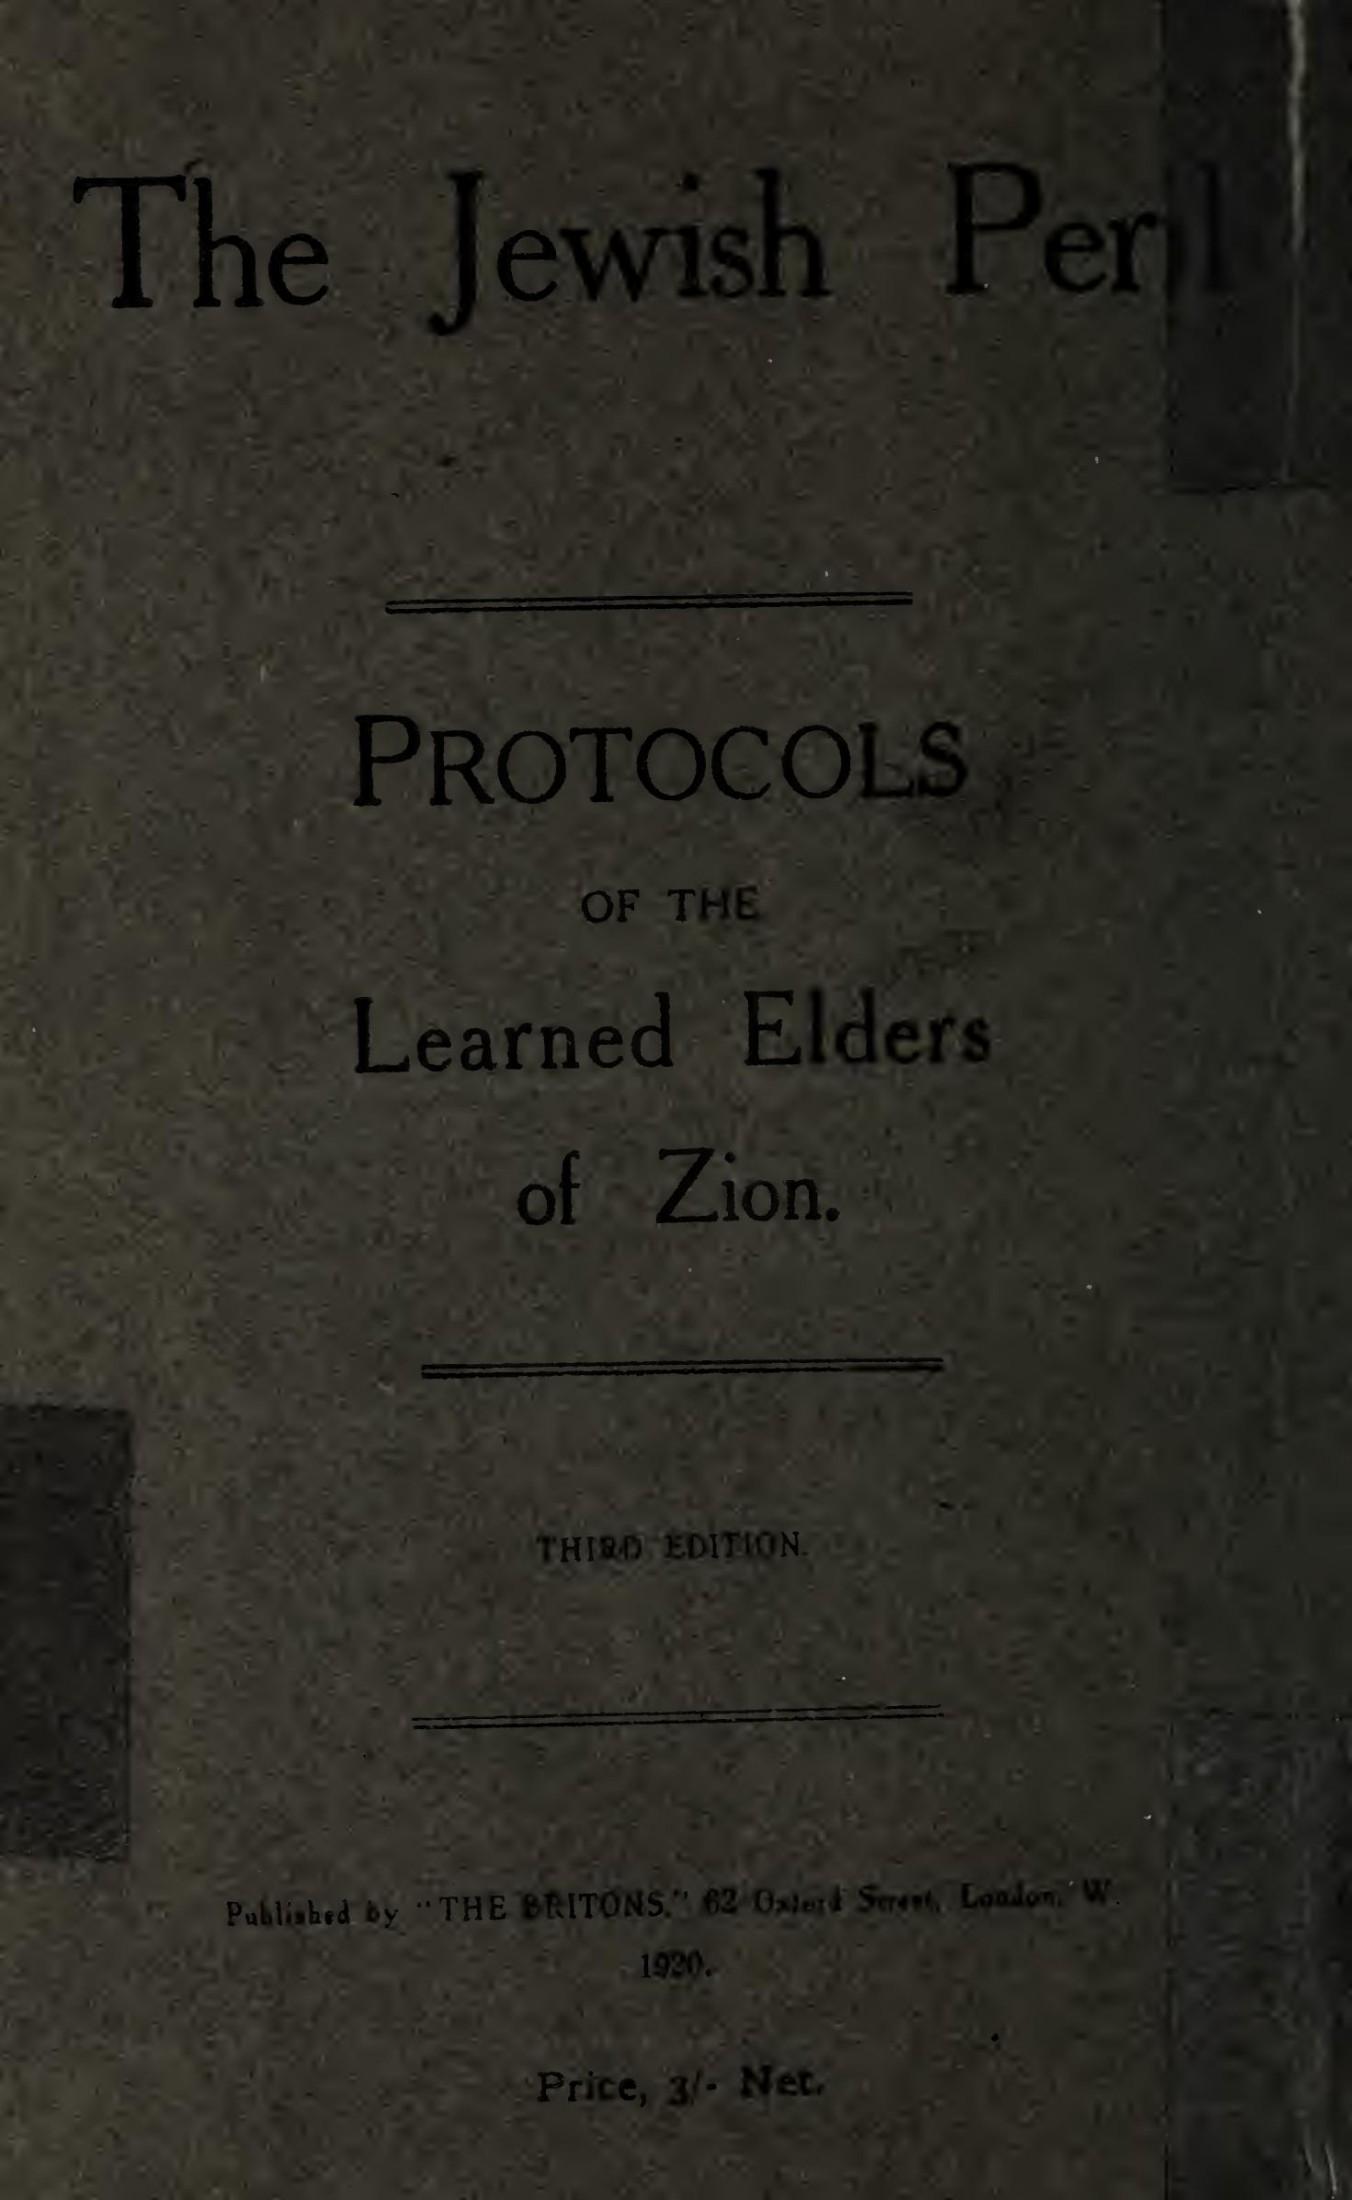 The Jewish Peril - Protocols of the Learned Elders of Zion (1919) by Sergyei Nilus, 1862-1930